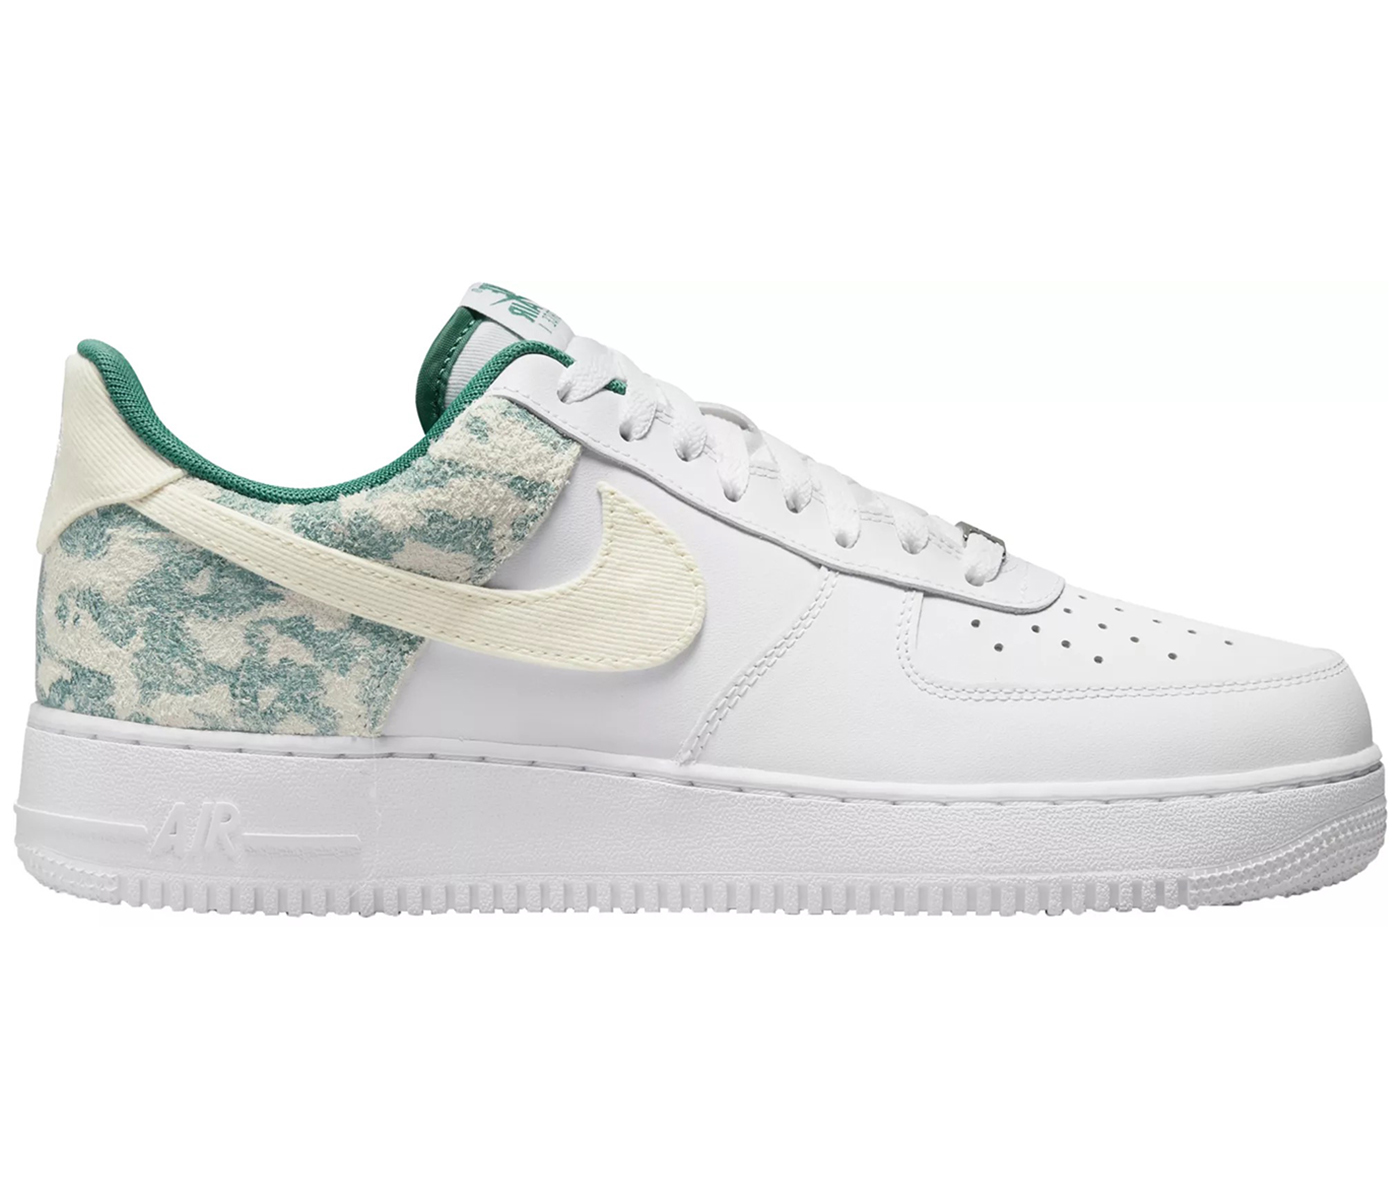 Nike Air Force 1 Low '07 LV8 Neptune Green Camo